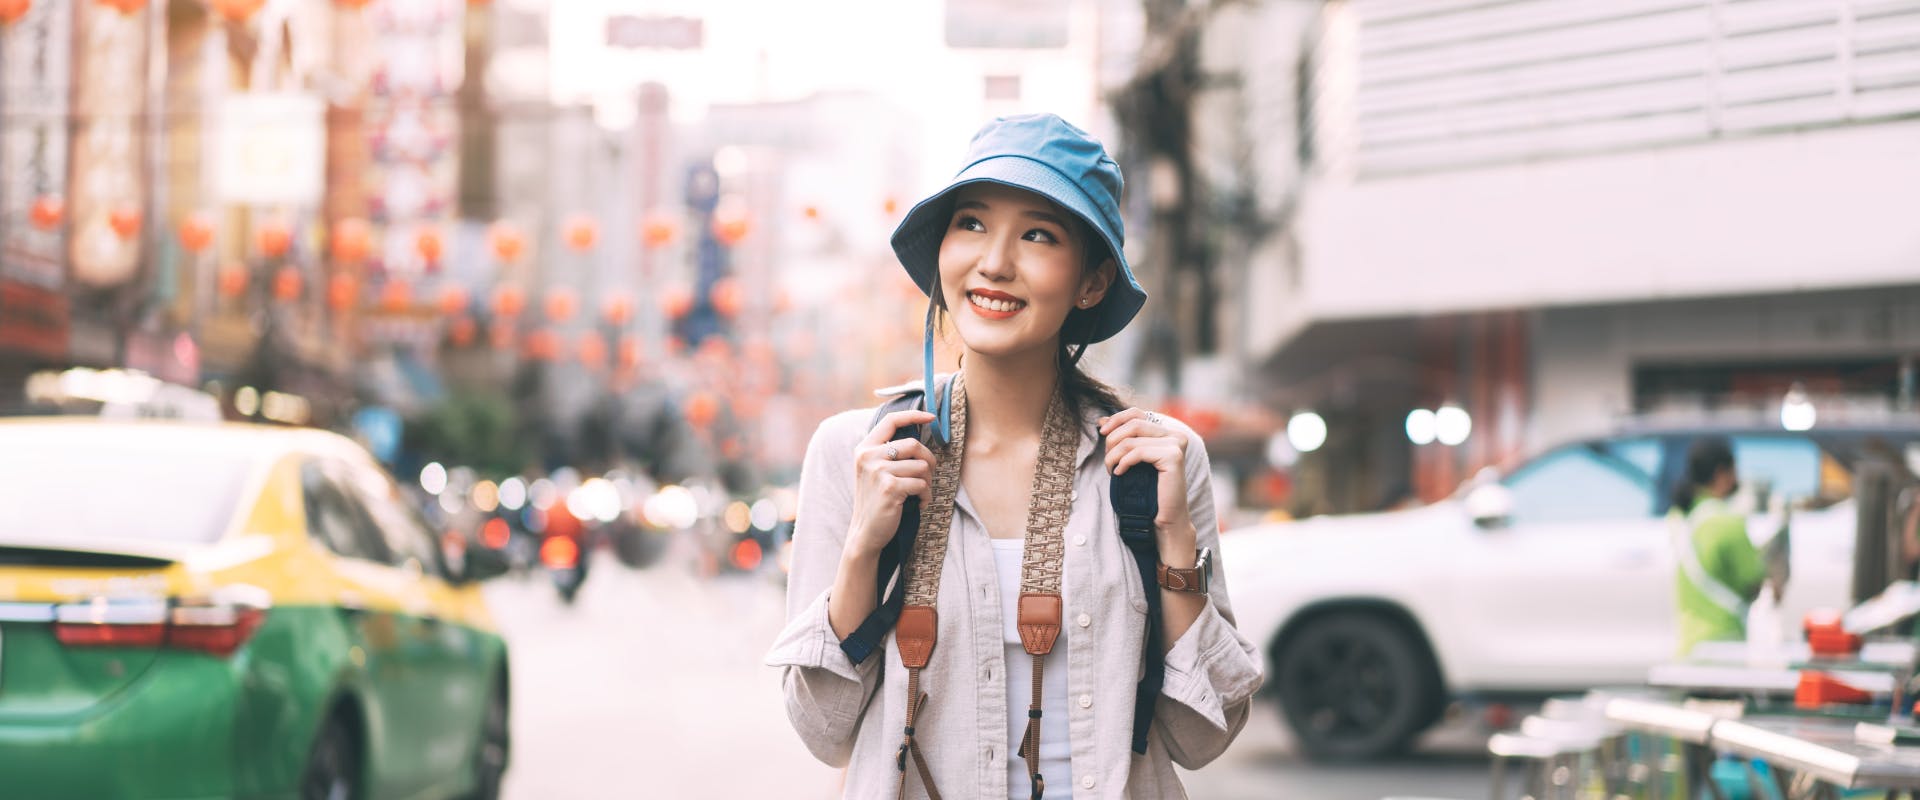 a solo female traveler walking down a busy street wearing a blue bucket hat and clutching the straps of her backpack while smiling